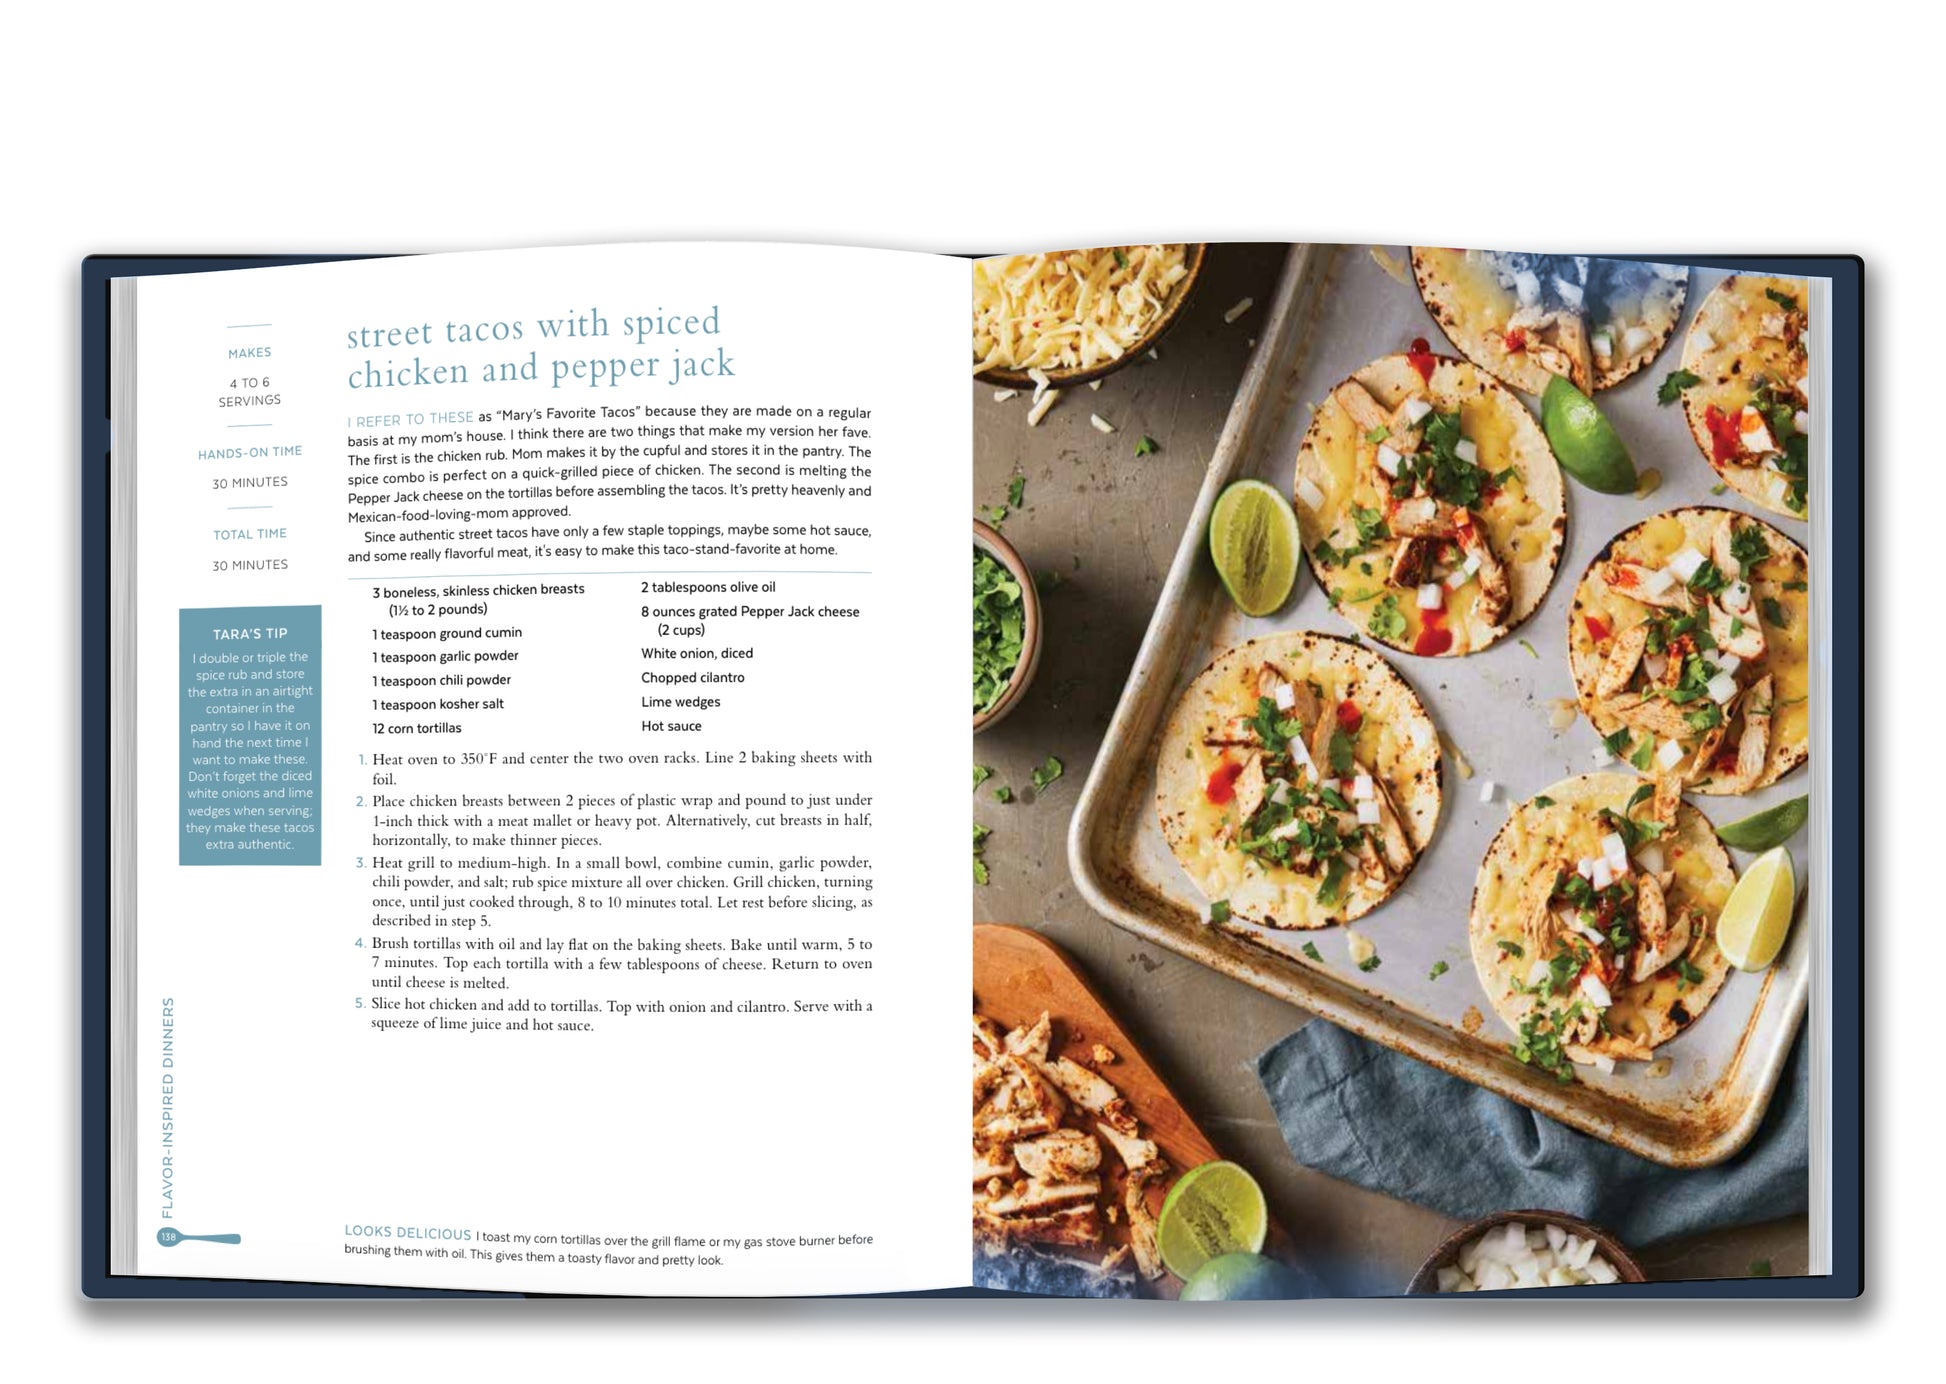 Live Life Deliciously: Recipes For Busy Weeknights, Leisurely Weekends, Sweet Tacos with Spiced Chicken and Pepper Jack